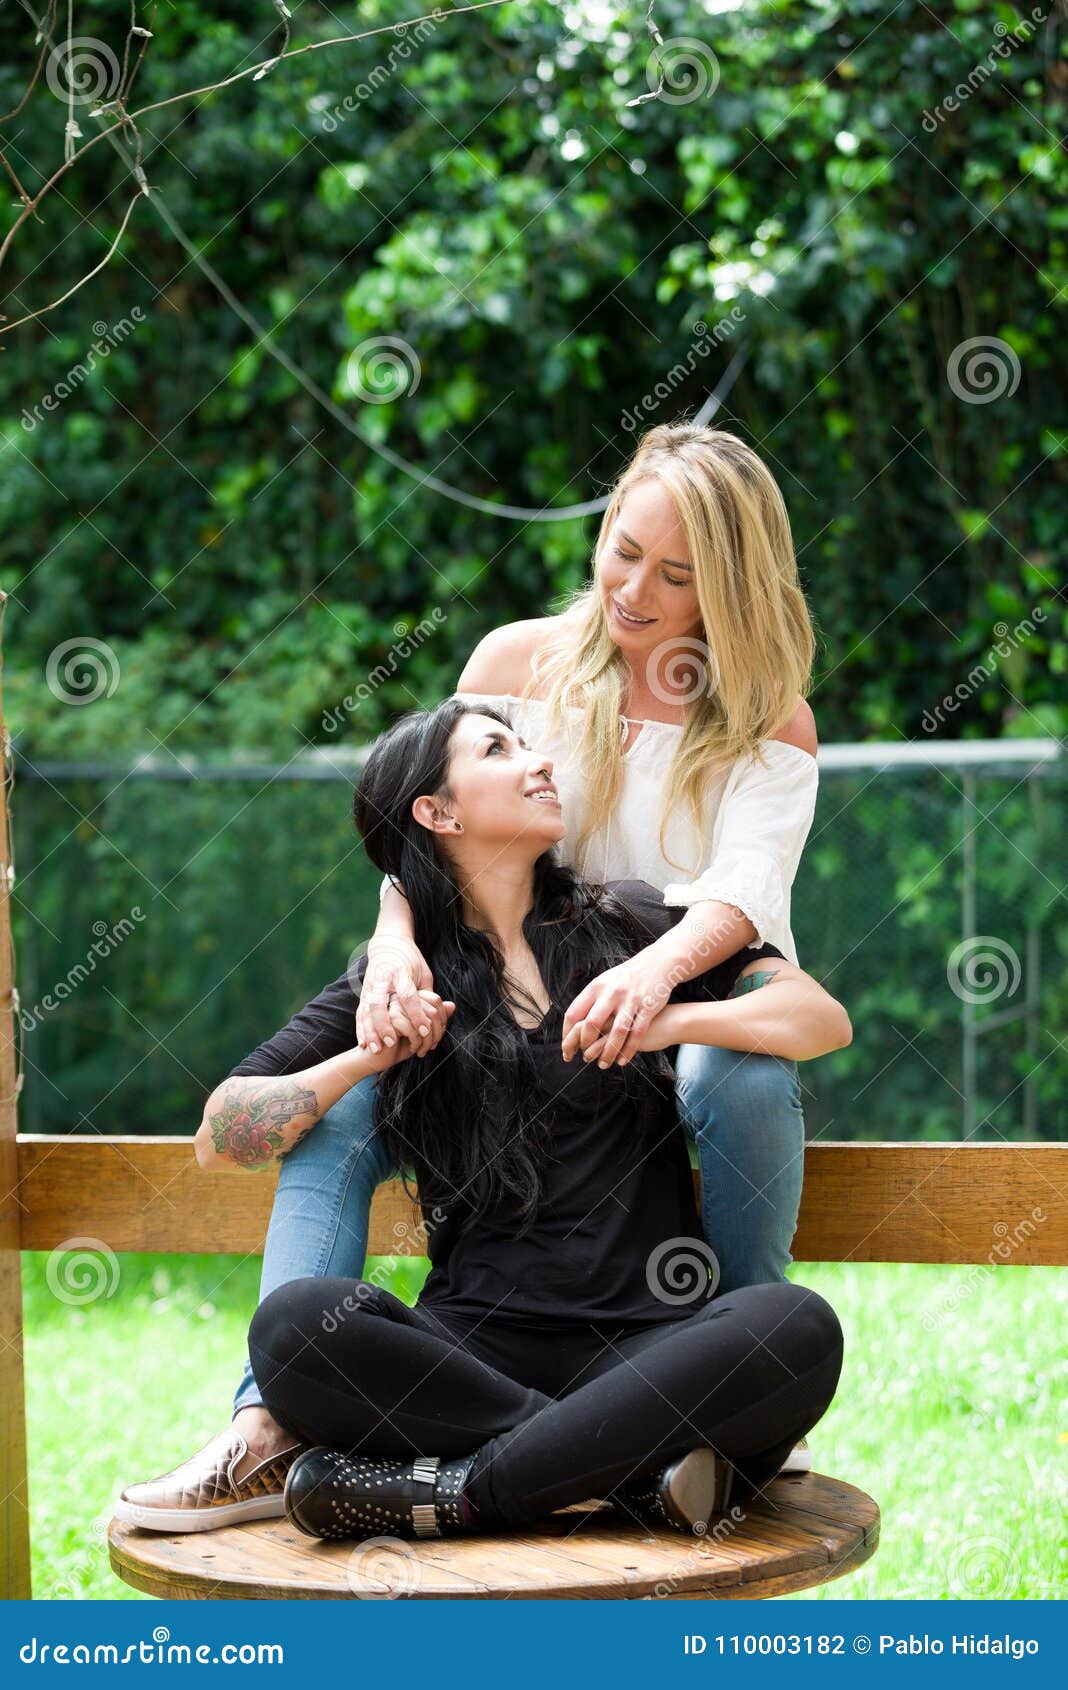 A Pair Of Proud Lesbian In Outdoors Sitting On A Wooden Table Blonde Woman Is Hugging A